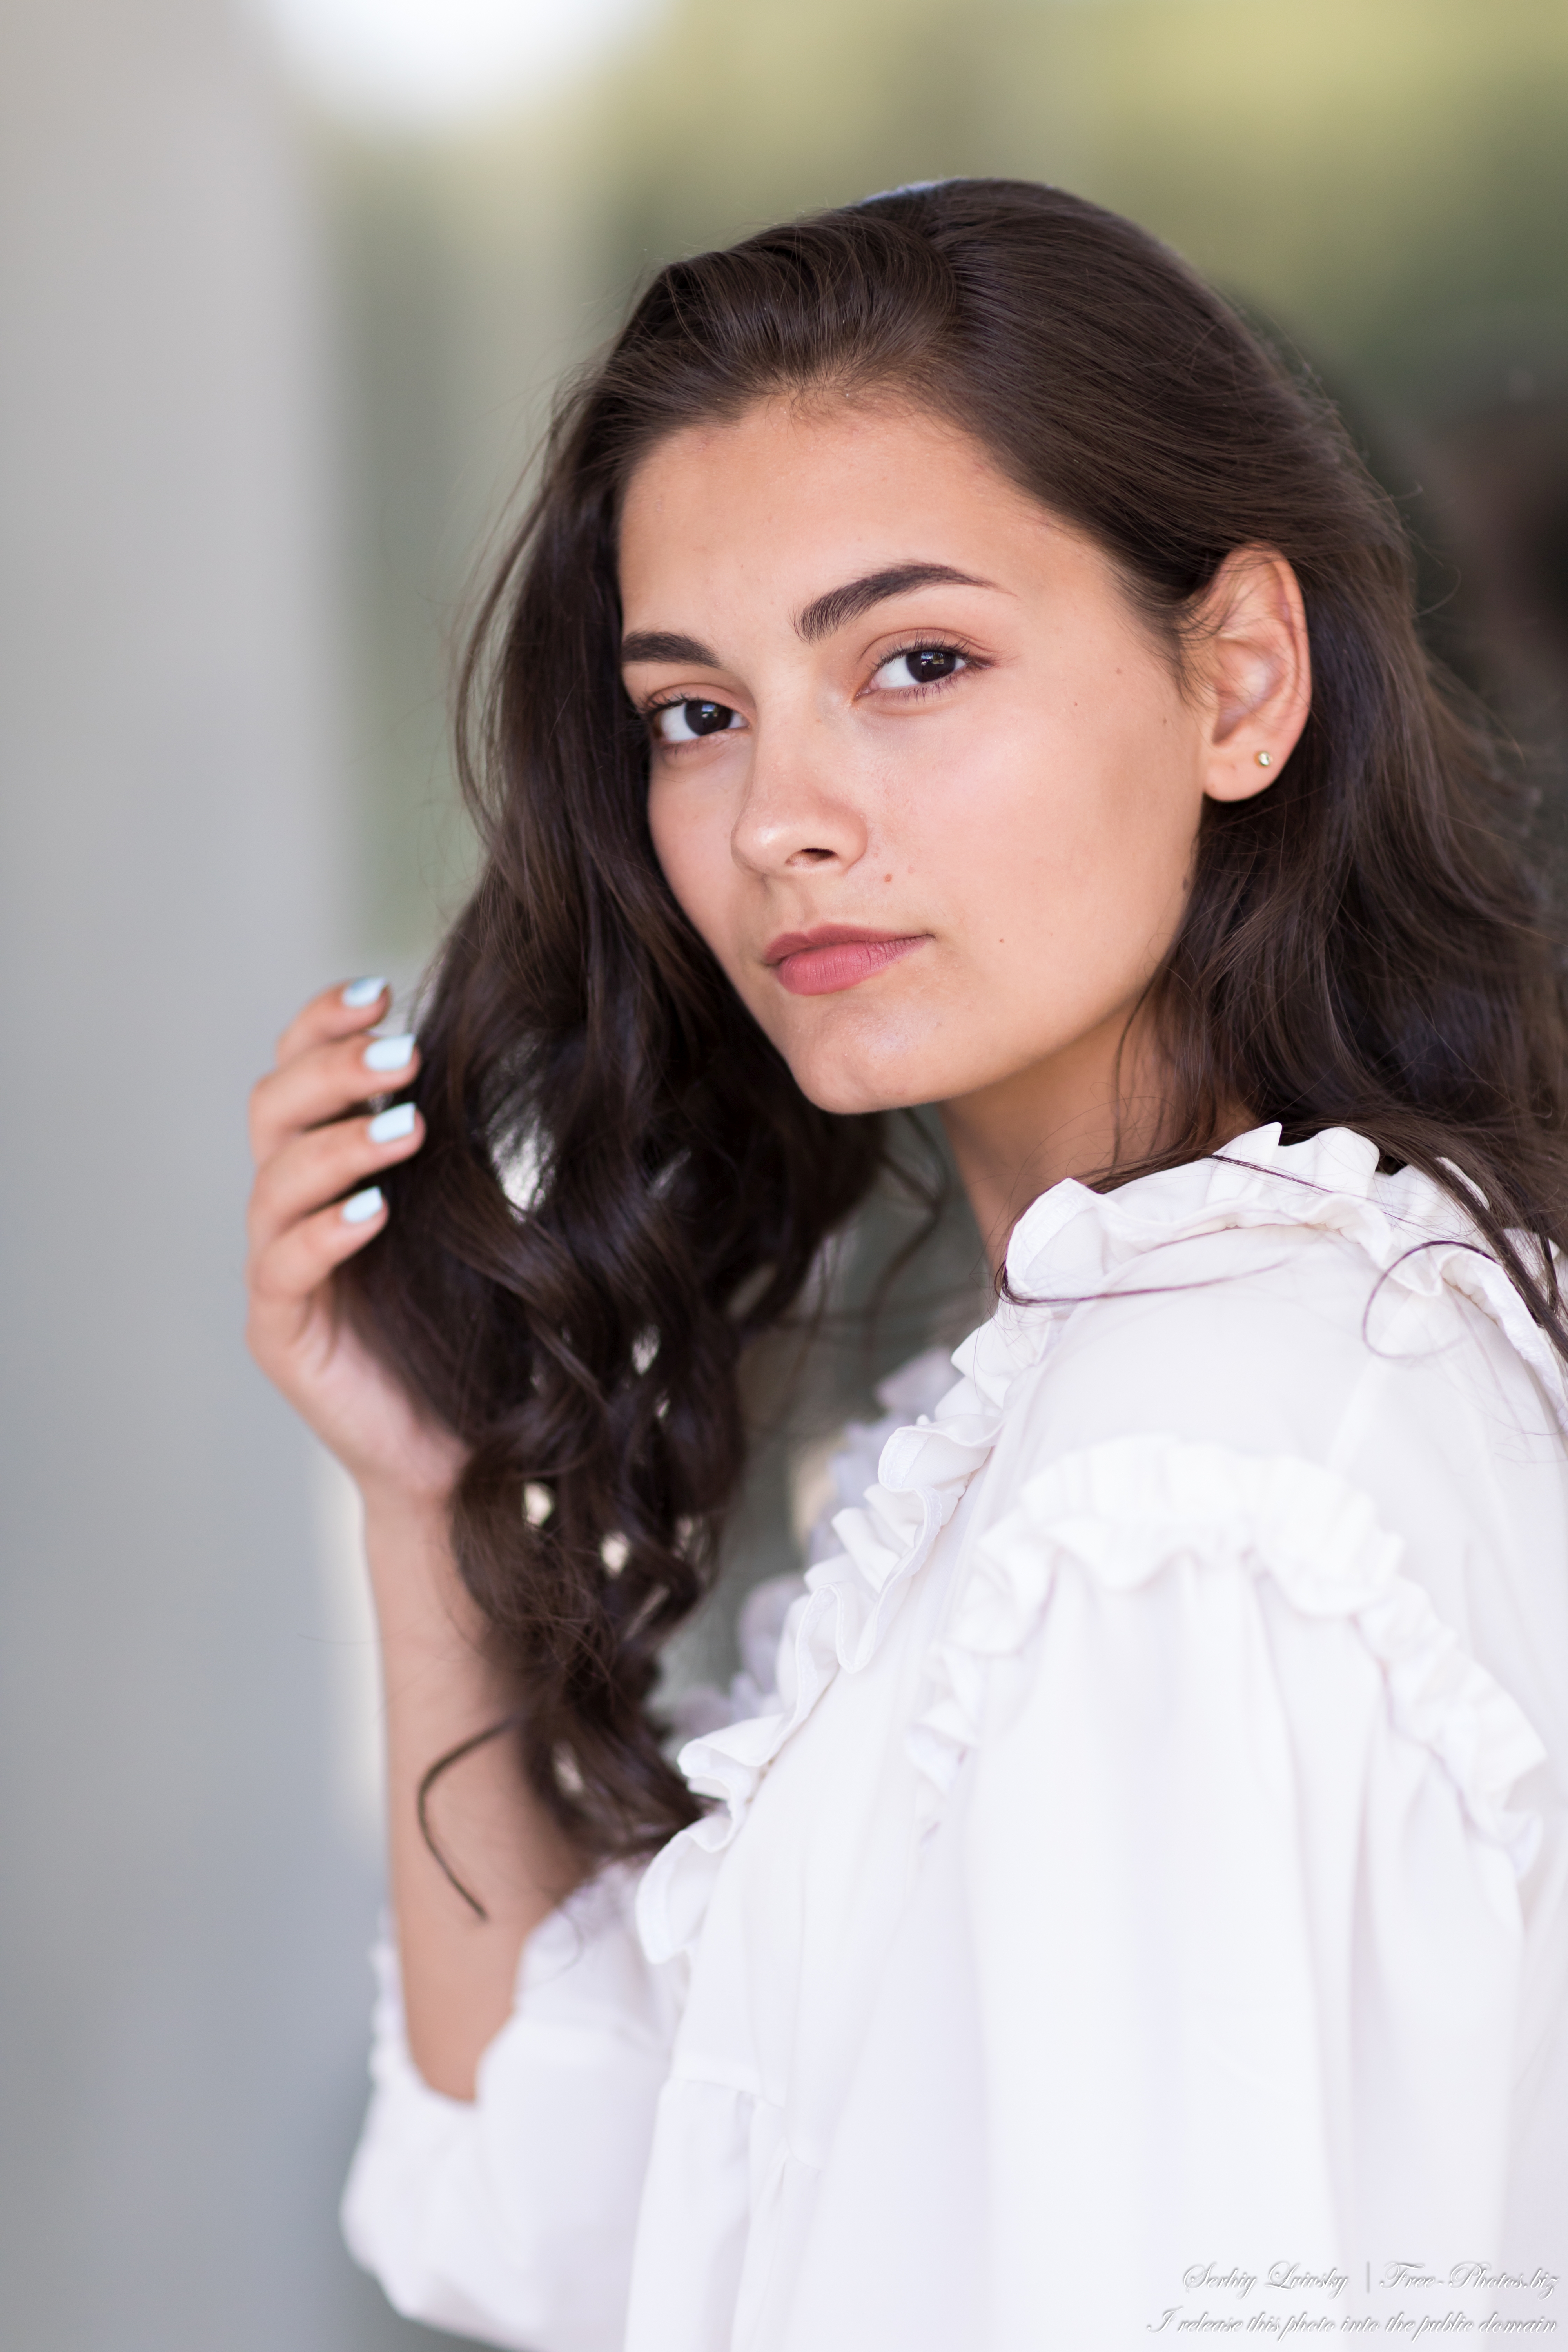 marichka_a_16-year-old_catholic_girl_photographed_by_serhiy_lvivsky_in_sept_2020_21